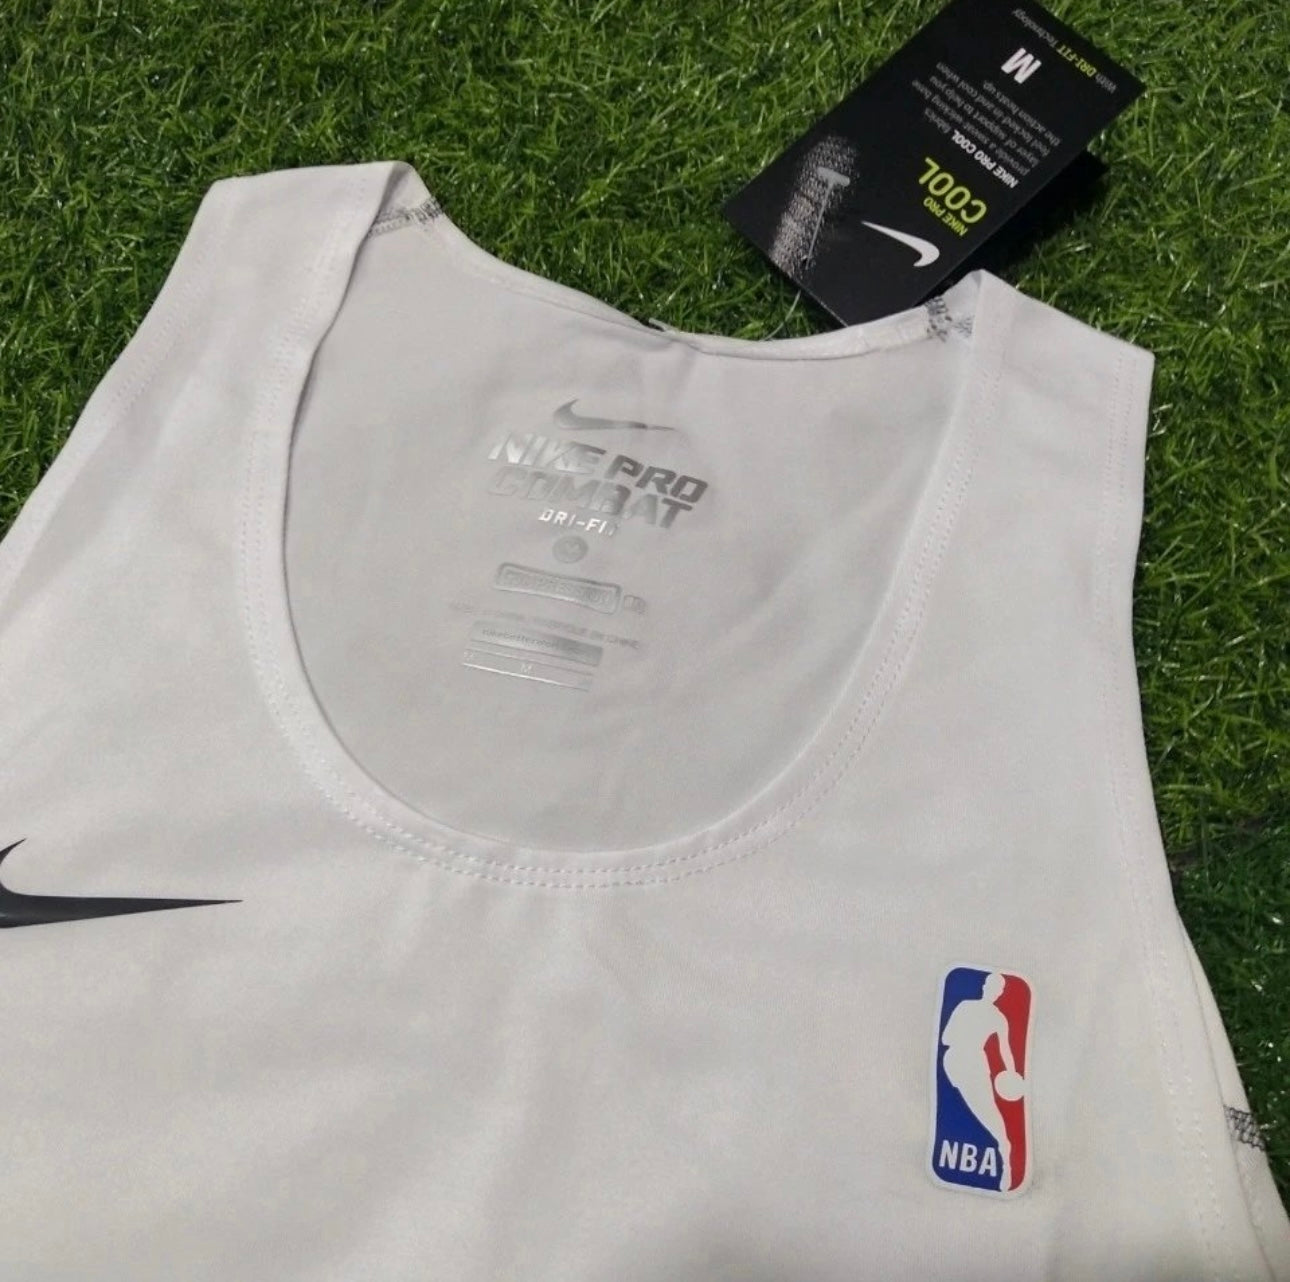 NIKE PRO NBA Compression Tank Top White Large Rare Best Offer Rare